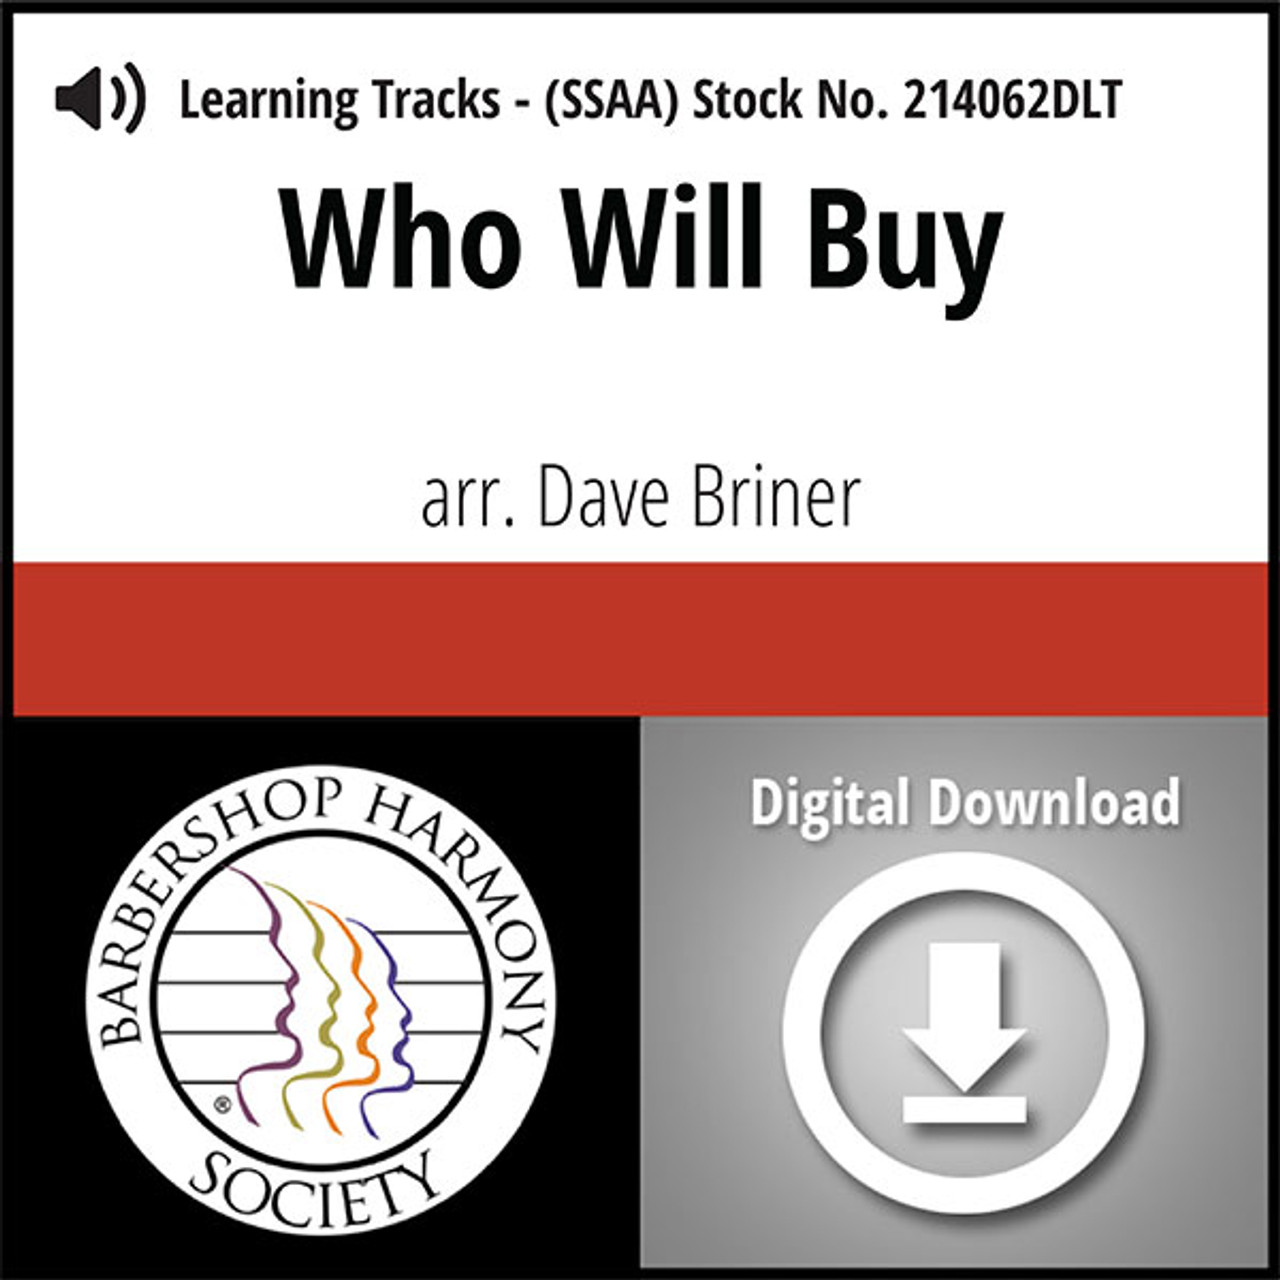 Who Will Buy (SSAA) (arr. Briner) - Digital Learning Tracks for 213629